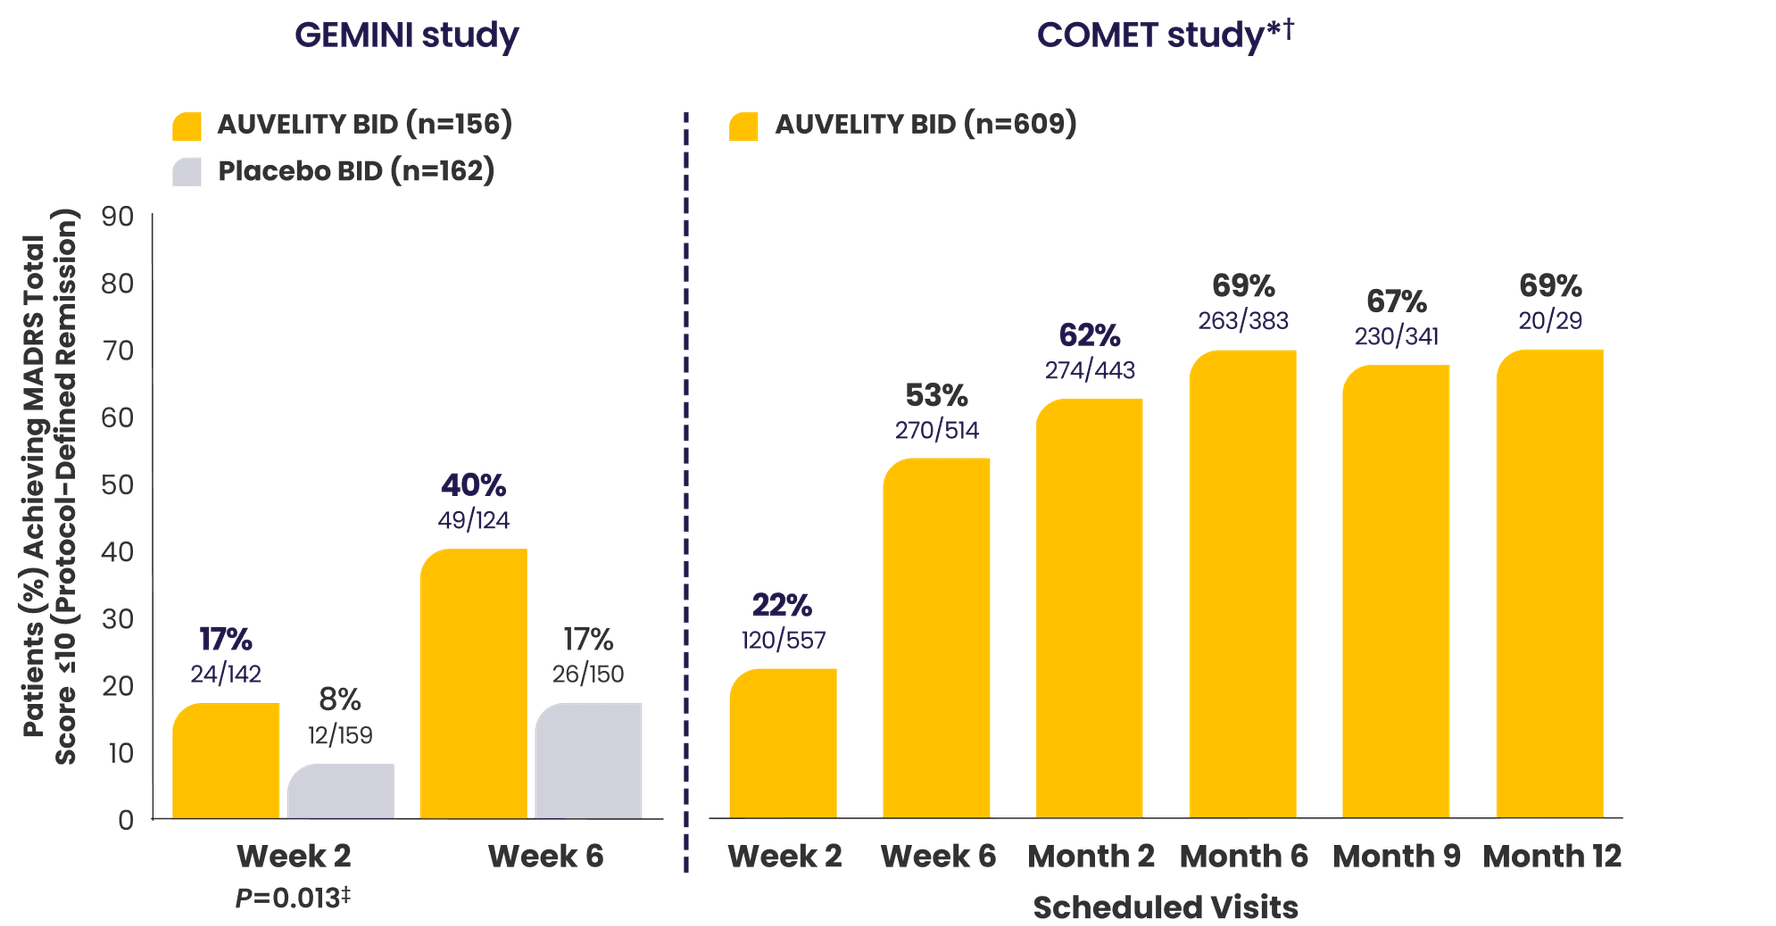 Bar graphs with percentage of patients achieving remission in the 6-week GEMINI and 12-month COMET studies.